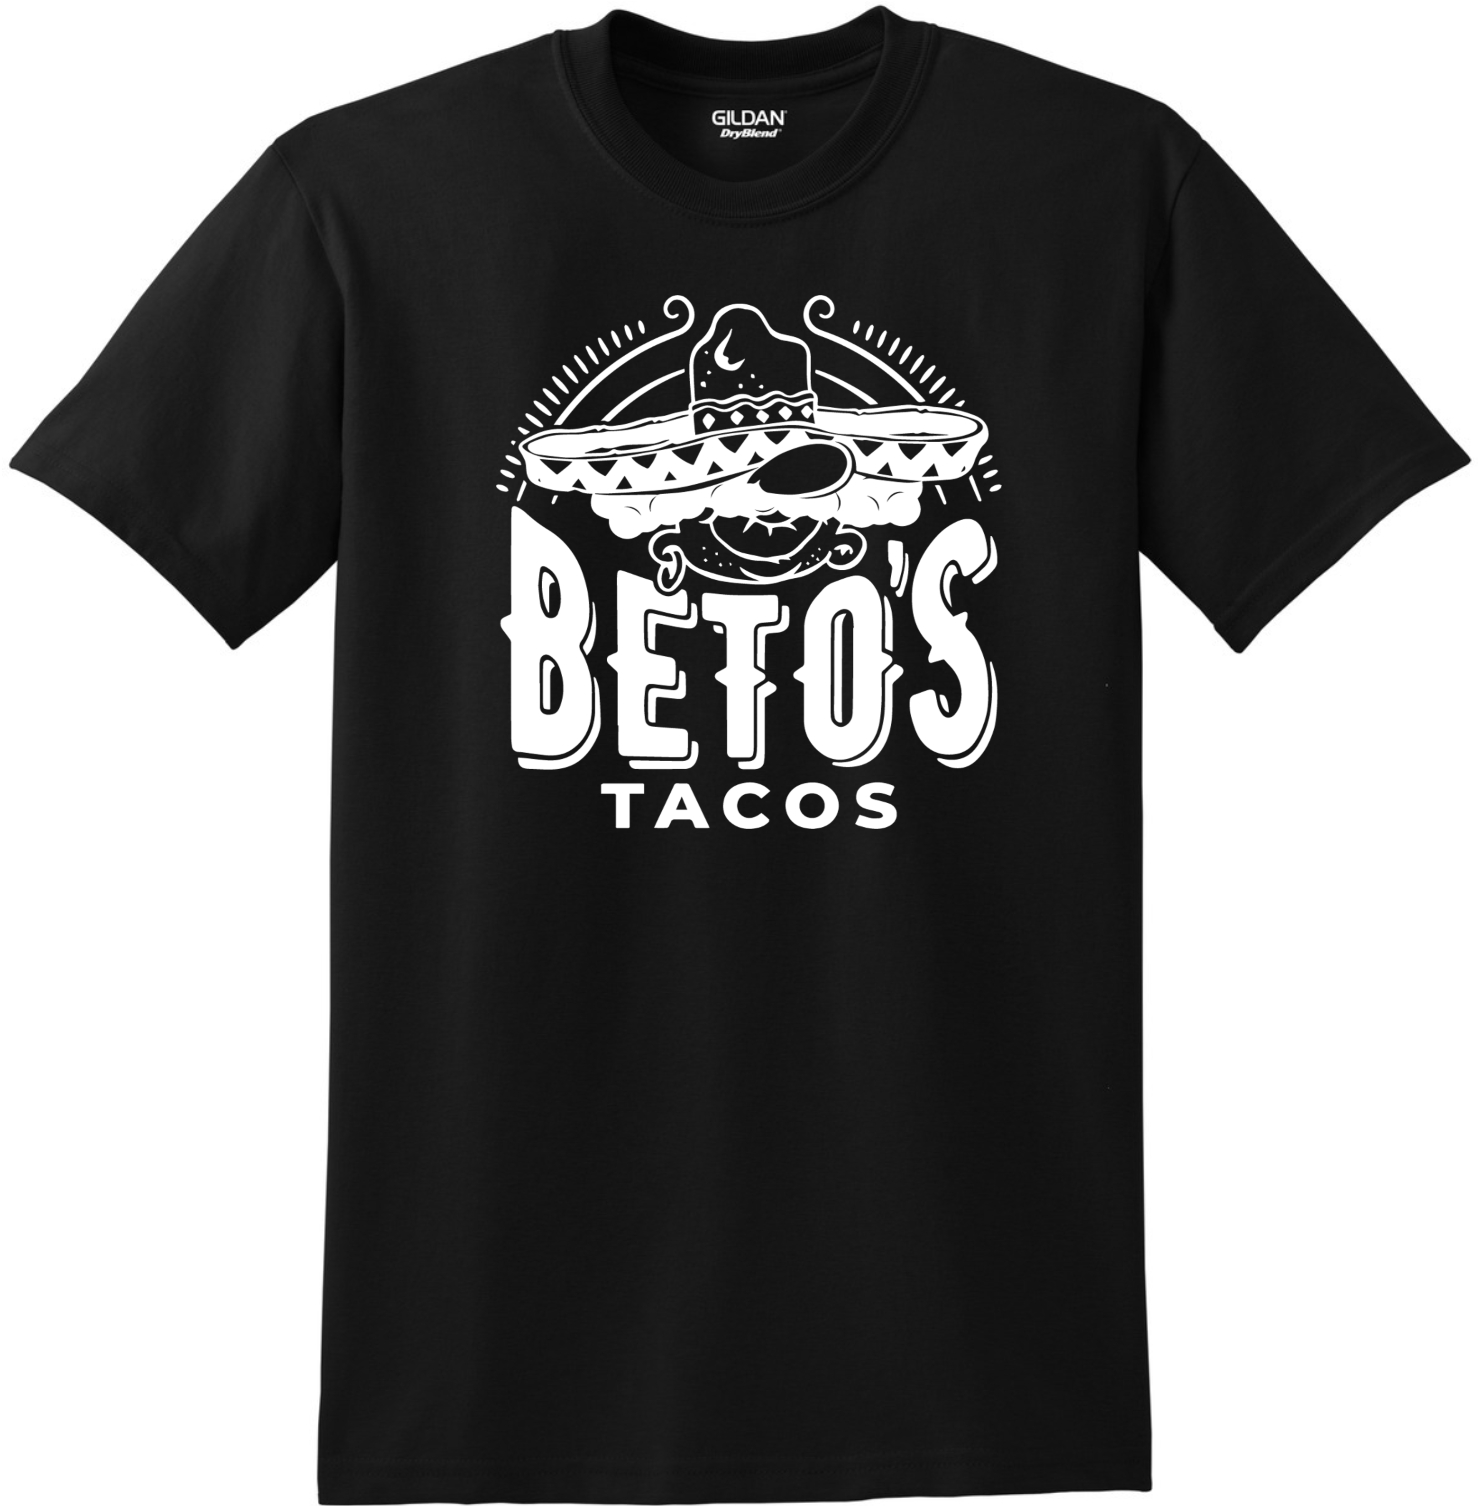 Our Taco T-Shirt